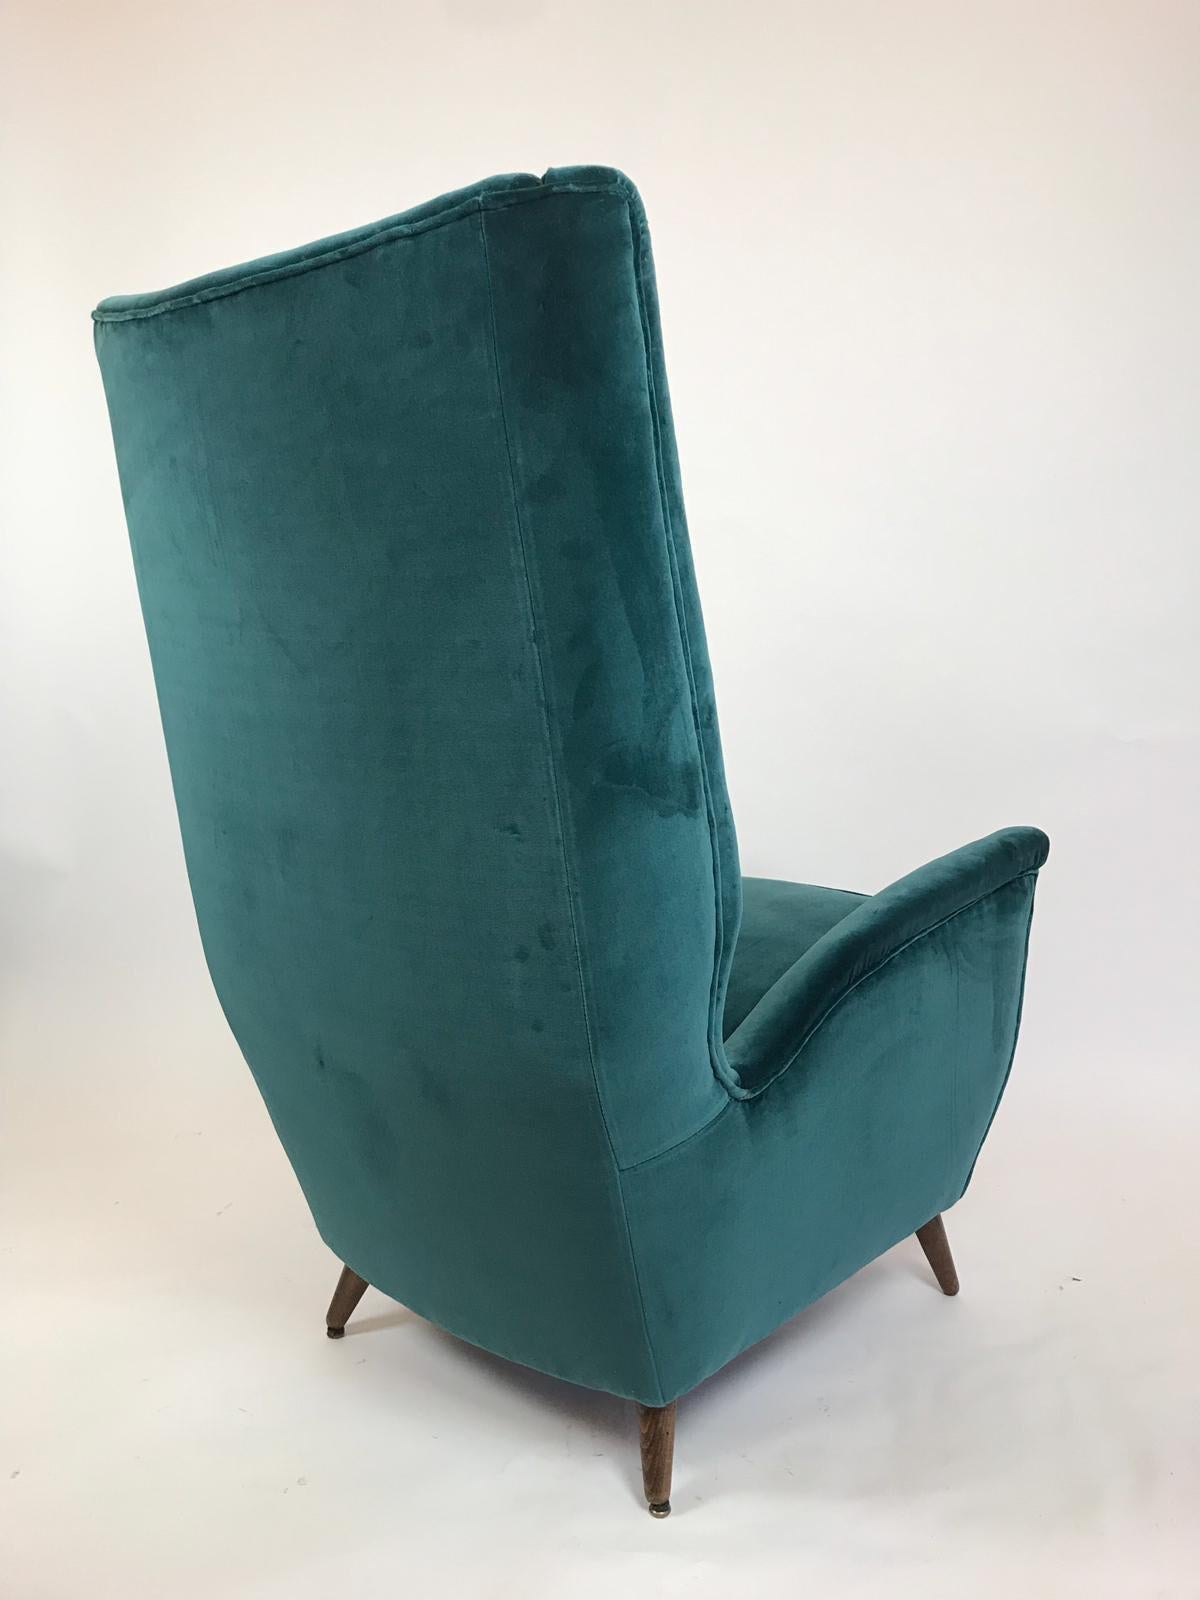 Gio Ponti Pair of High Back Armchairs Newly Upholstered in Teal Velvet (Italienisch)